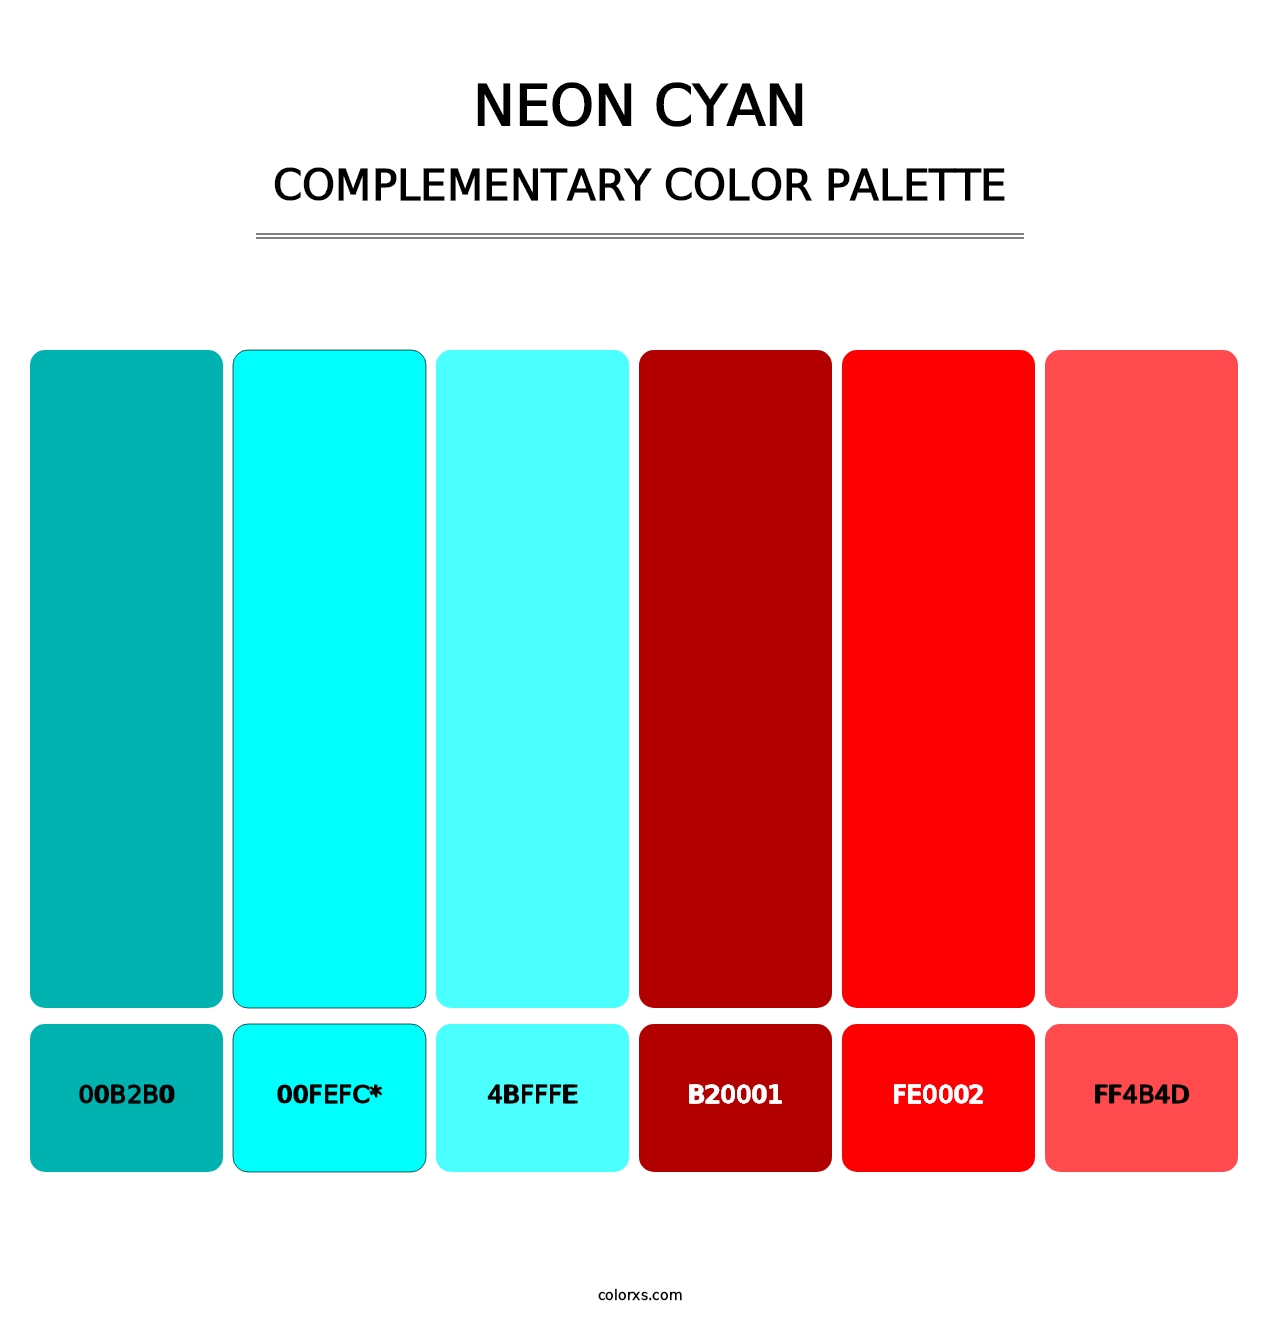 Neon Cyan - Complementary Color Palette